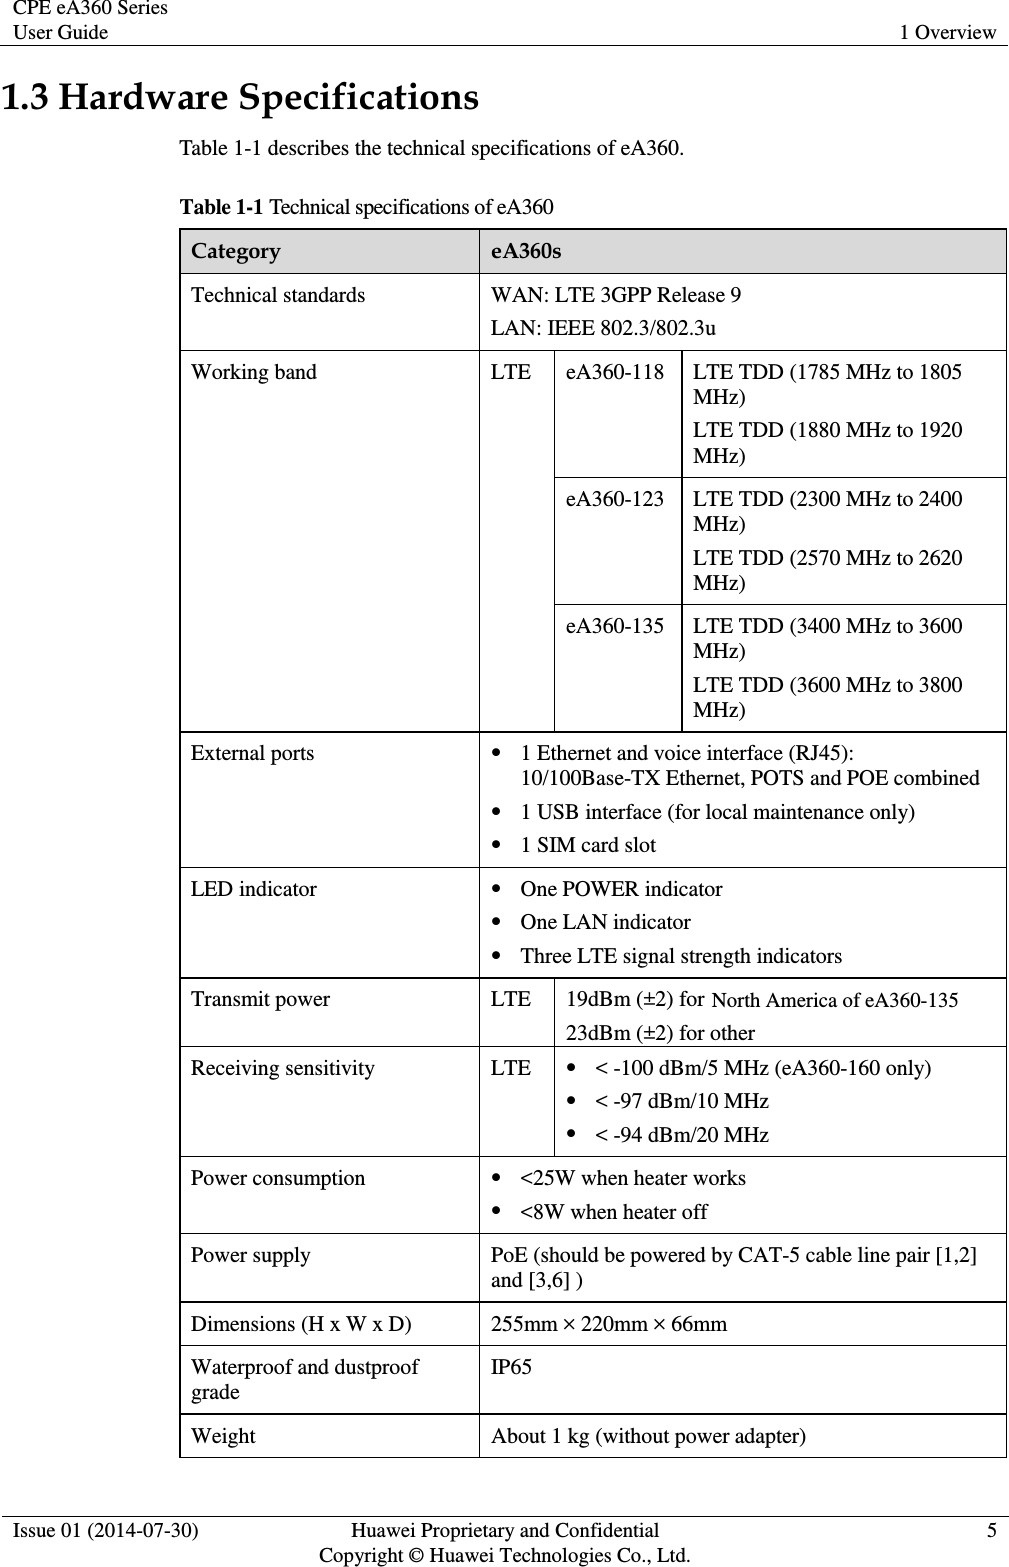 CPE eA360 Series User Guide  1 Overview  Issue 01 (2014-07-30)  Huawei Proprietary and Confidential                                     Copyright © Huawei Technologies Co., Ltd.  5  1.3 Hardware Specifications Table 1-1 describes the technical specifications of eA360. Table 1-1 Technical specifications of eA360 Category  eA360s Technical standards  WAN: LTE 3GPP Release 9 LAN: IEEE 802.3/802.3u Working band  LTE    eA360-118  LTE TDD (1785 MHz to 1805 MHz) LTE TDD (1880 MHz to 1920 MHz) eA360-123  LTE TDD (2300 MHz to 2400 MHz) LTE TDD (2570 MHz to 2620 MHz) eA360-135  LTE TDD (3400 MHz to 3600 MHz) LTE TDD (3600 MHz to 3800 MHz) External ports   1 Ethernet and voice interface (RJ45): 10/100Base-TX Ethernet, POTS and POE combined  1 USB interface (for local maintenance only)  1 SIM card slot LED indicator   One POWER indicator  One LAN indicator  Three LTE signal strength indicators Transmit power  LTE  19dBm (±2) for   23dBm (±2) for other   Receiving sensitivity  LTE   &lt; -100 dBm/5 MHz (eA360-160 only)  &lt; -97 dBm/10 MHz  &lt; -94 dBm/20 MHz Power consumption   &lt;25W when heater works  &lt;8W when heater off Power supply  PoE (should be powered by CAT-5 cable line pair [1,2] and [3,6] ) Dimensions (H x W x D)  255mm × 220mm × 66mm Waterproof and dustproof grade  IP65 Weight  About 1 kg (without power adapter) North America of eA360-135